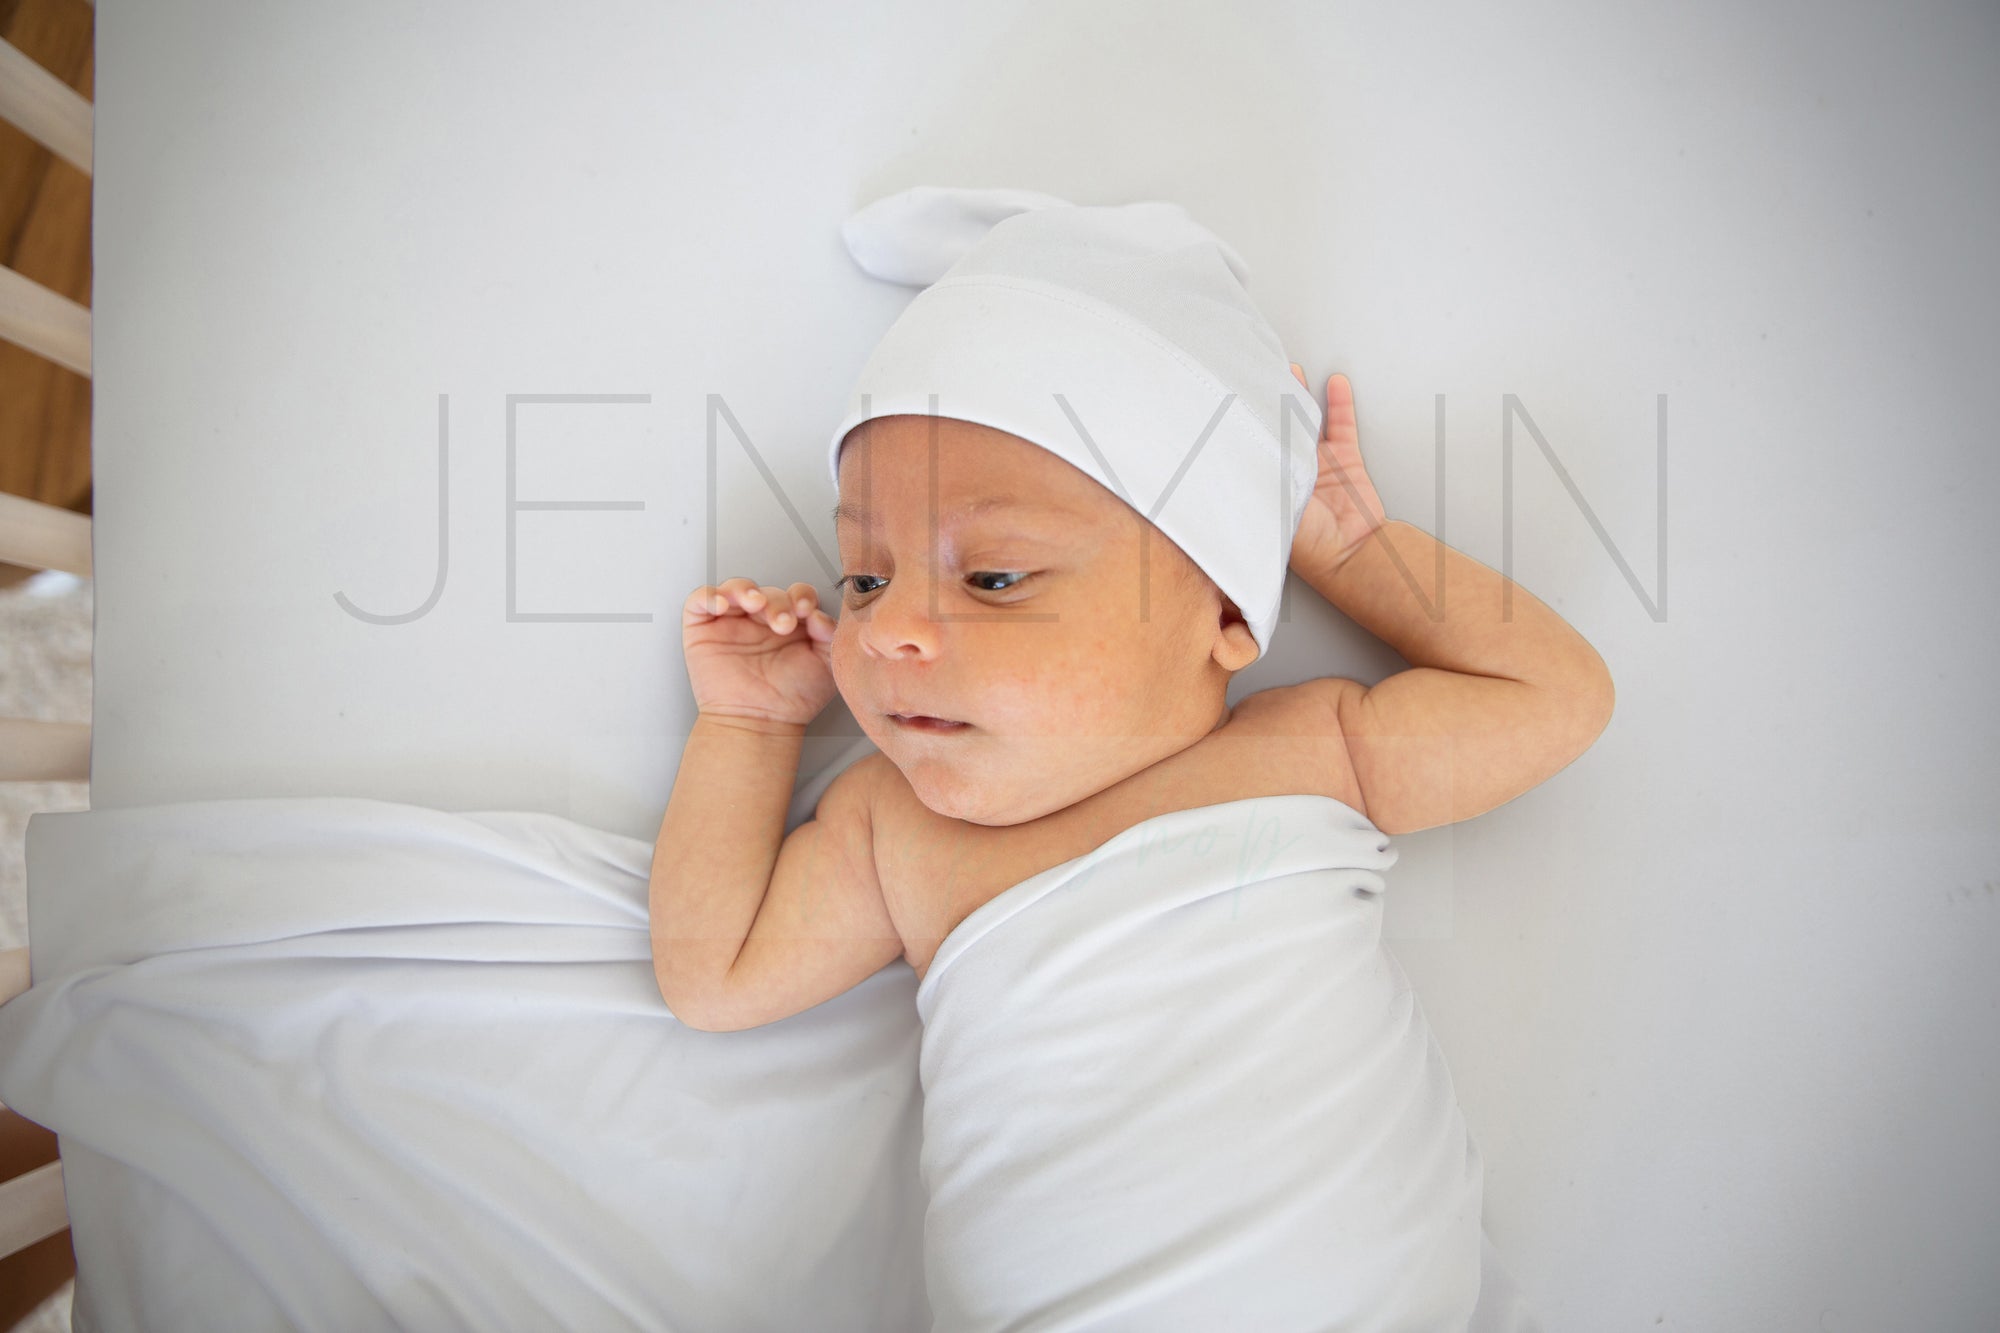 Stretch Jersey Blanket, knotted hat and crib sheet Mockup #BL08 PSD